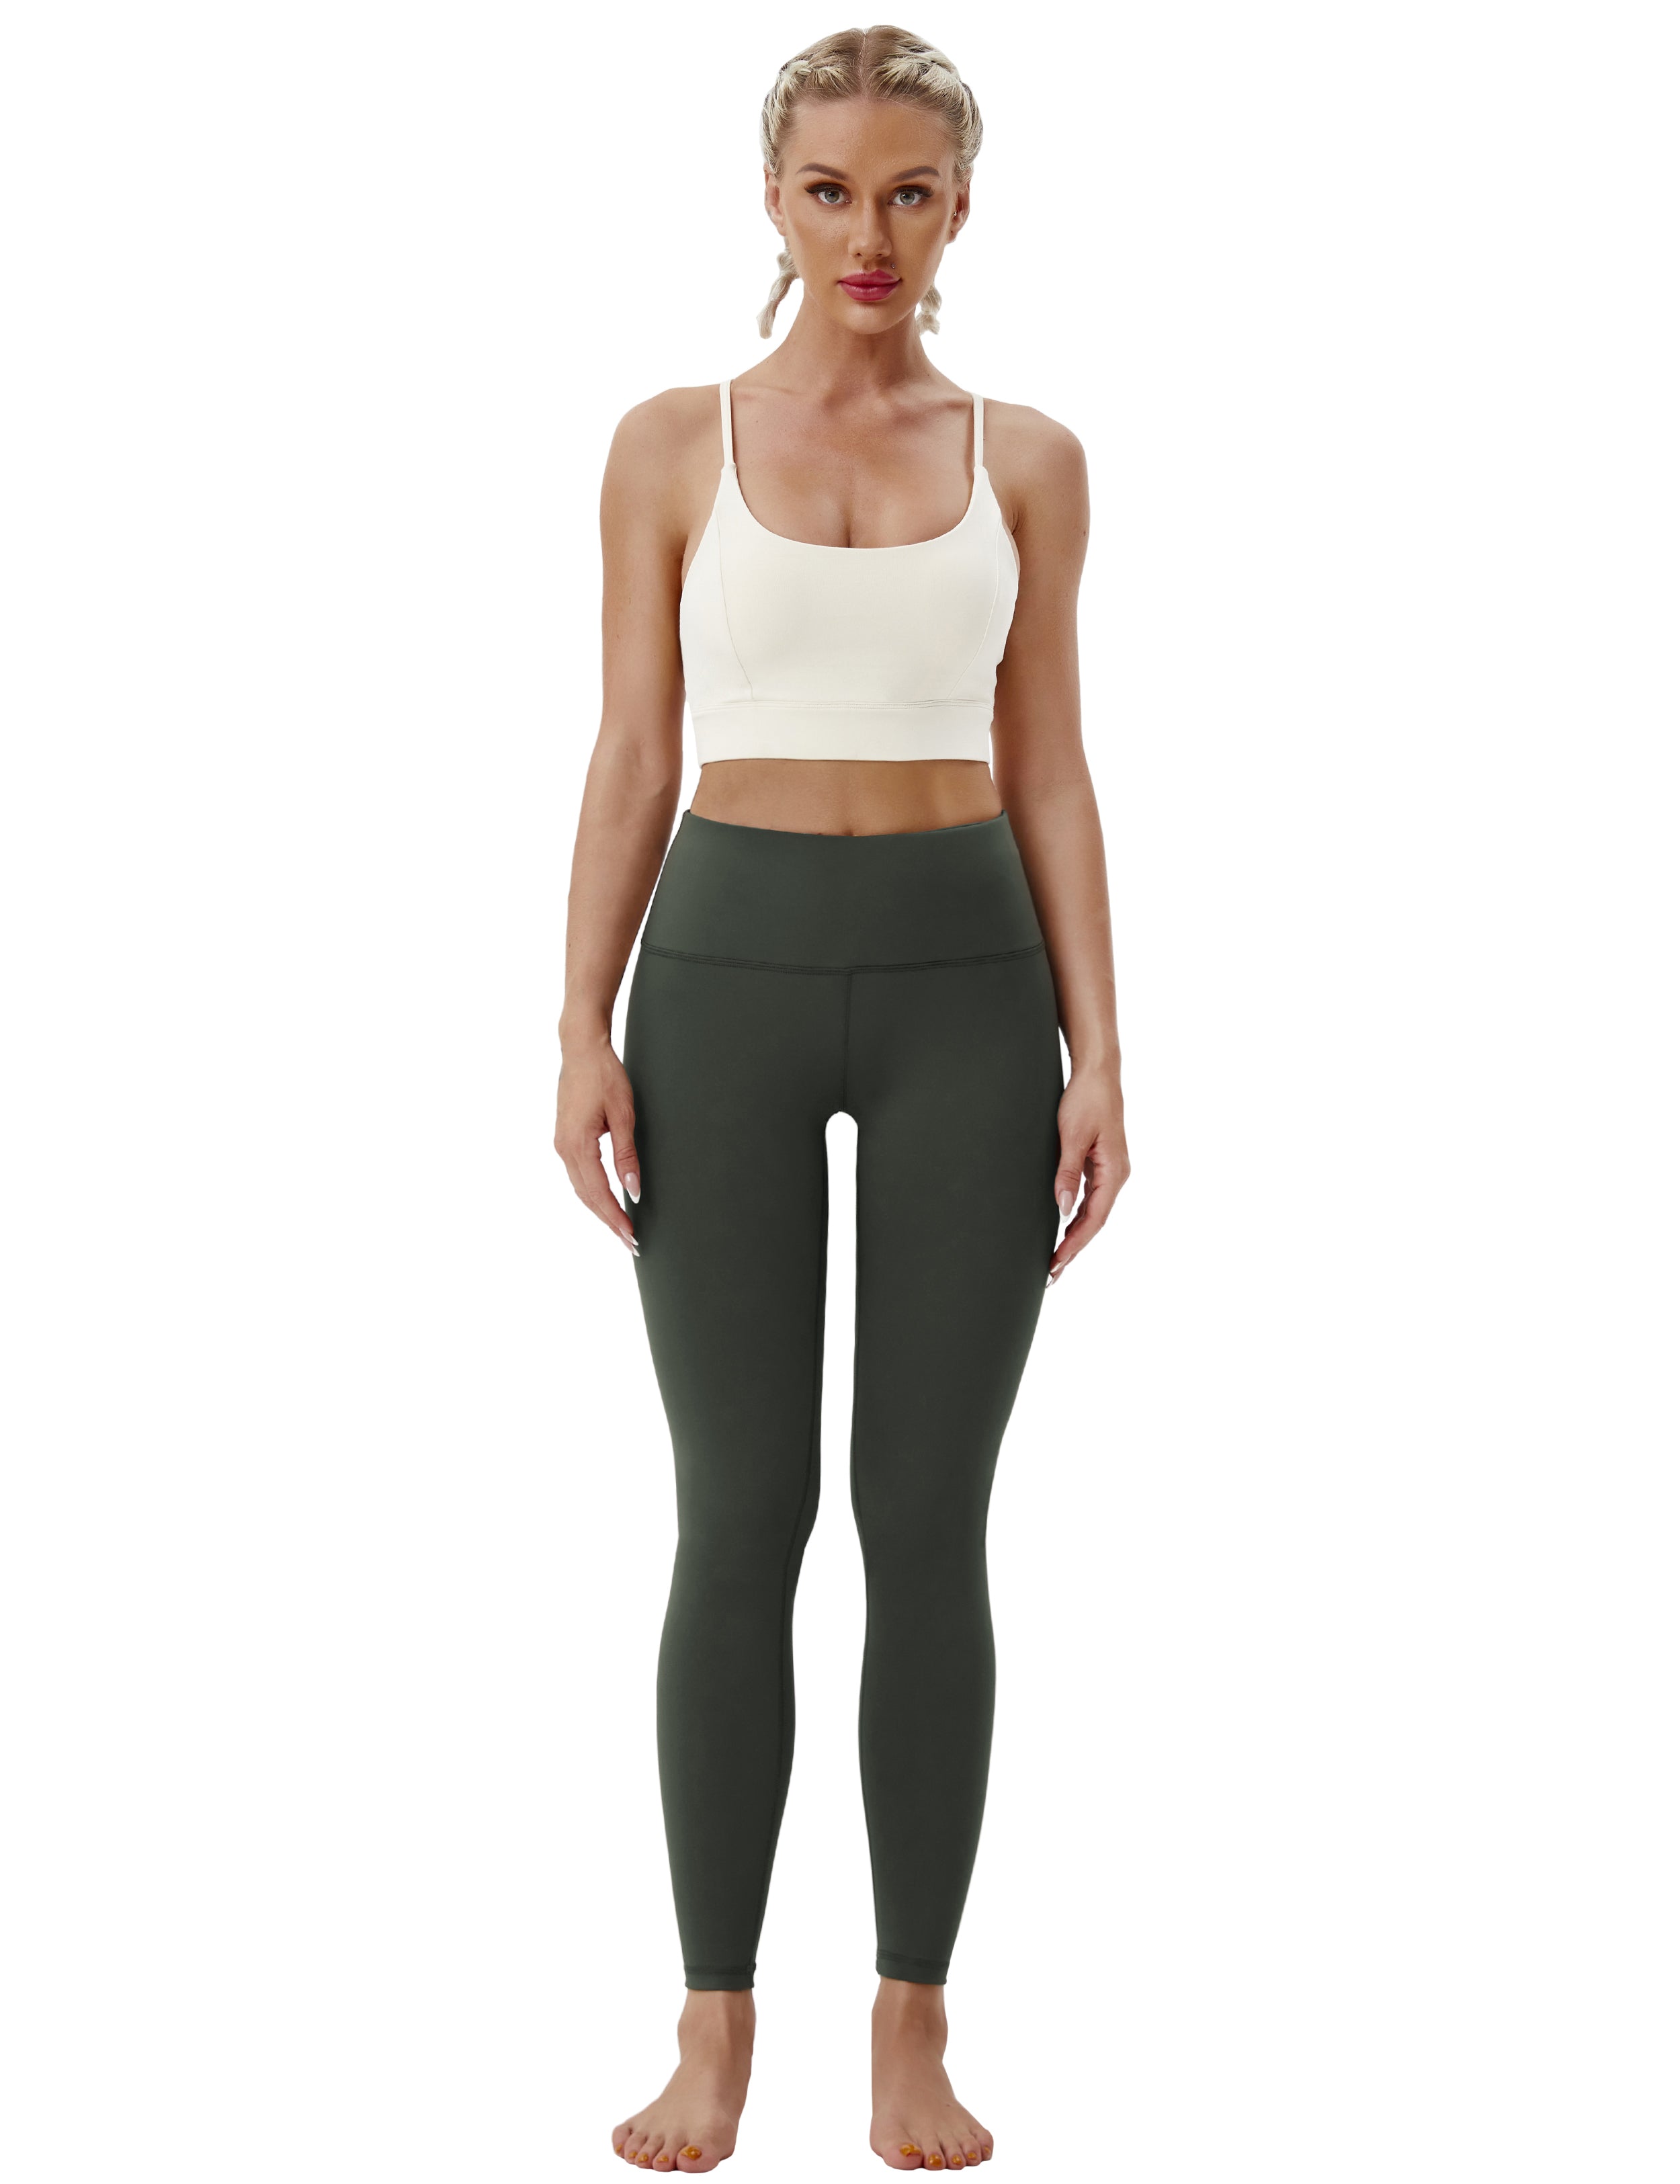 High Waist Golf Pants olivegray 75%Nylon/25%Spandex Fabric doesn't attract lint easily 4-way stretch No see-through Moisture-wicking Tummy control Inner pocket Four lengths